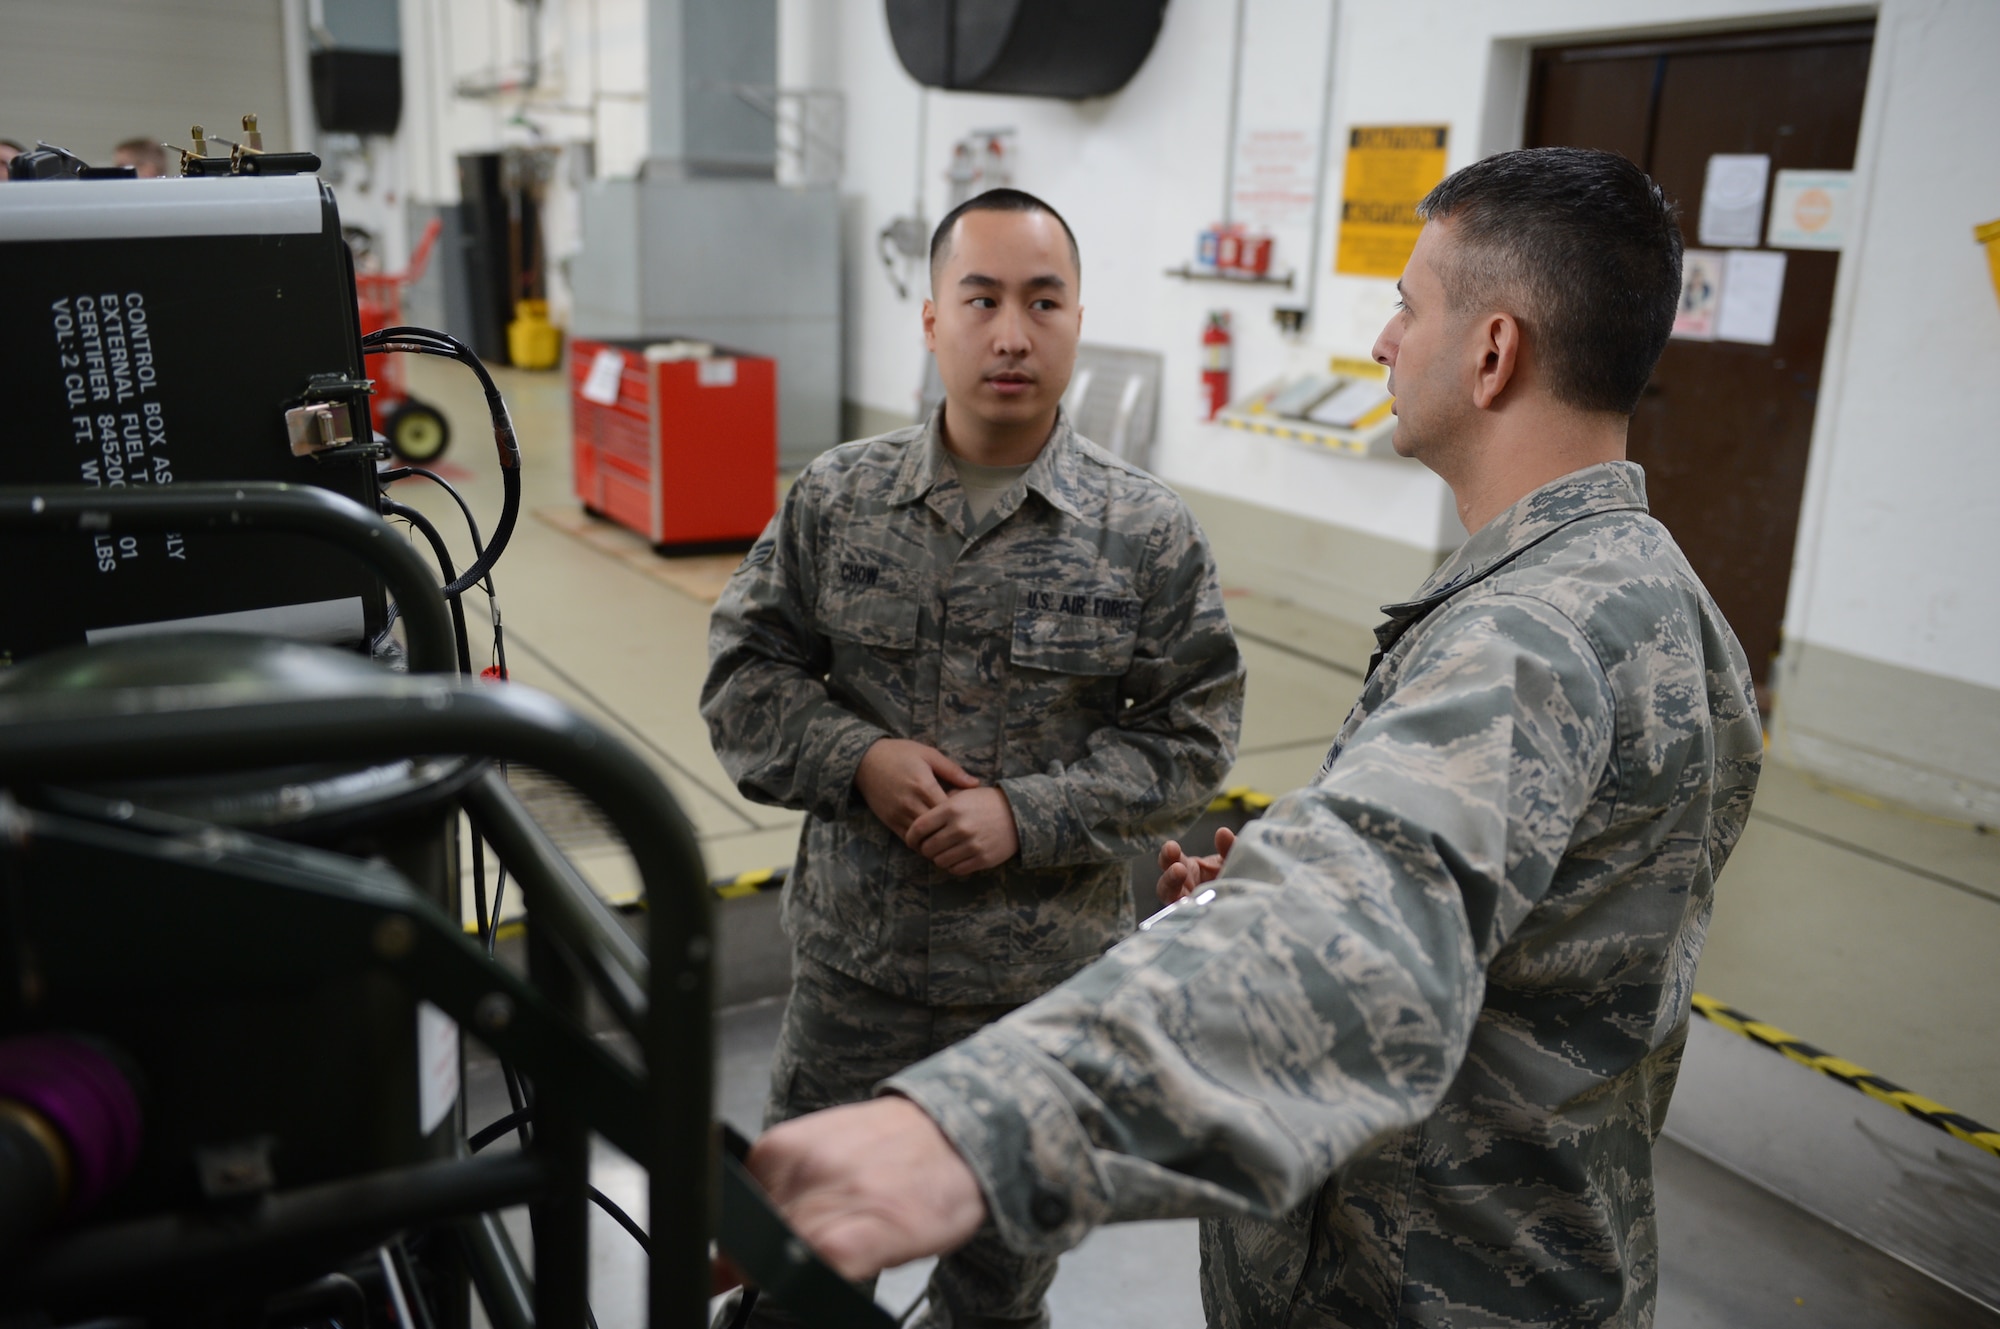 U.S. Air Force Col. David Julazadeh, 52nd Fighter Wing commander, pumps jet fuel into a fuel tank with Senior Airman Brandon Chow, 52nd Component Maintenance Squadron fuel systems journeyman, at Spangdahlem Air Base, Germany, Feb. 10, 2014. Julazadeh helped Chow complete a maintenance process to troubleshoot an incorrect quantity reading. (U.S. Air Force photo by Airman 1st Class Kyle Gese/Released)